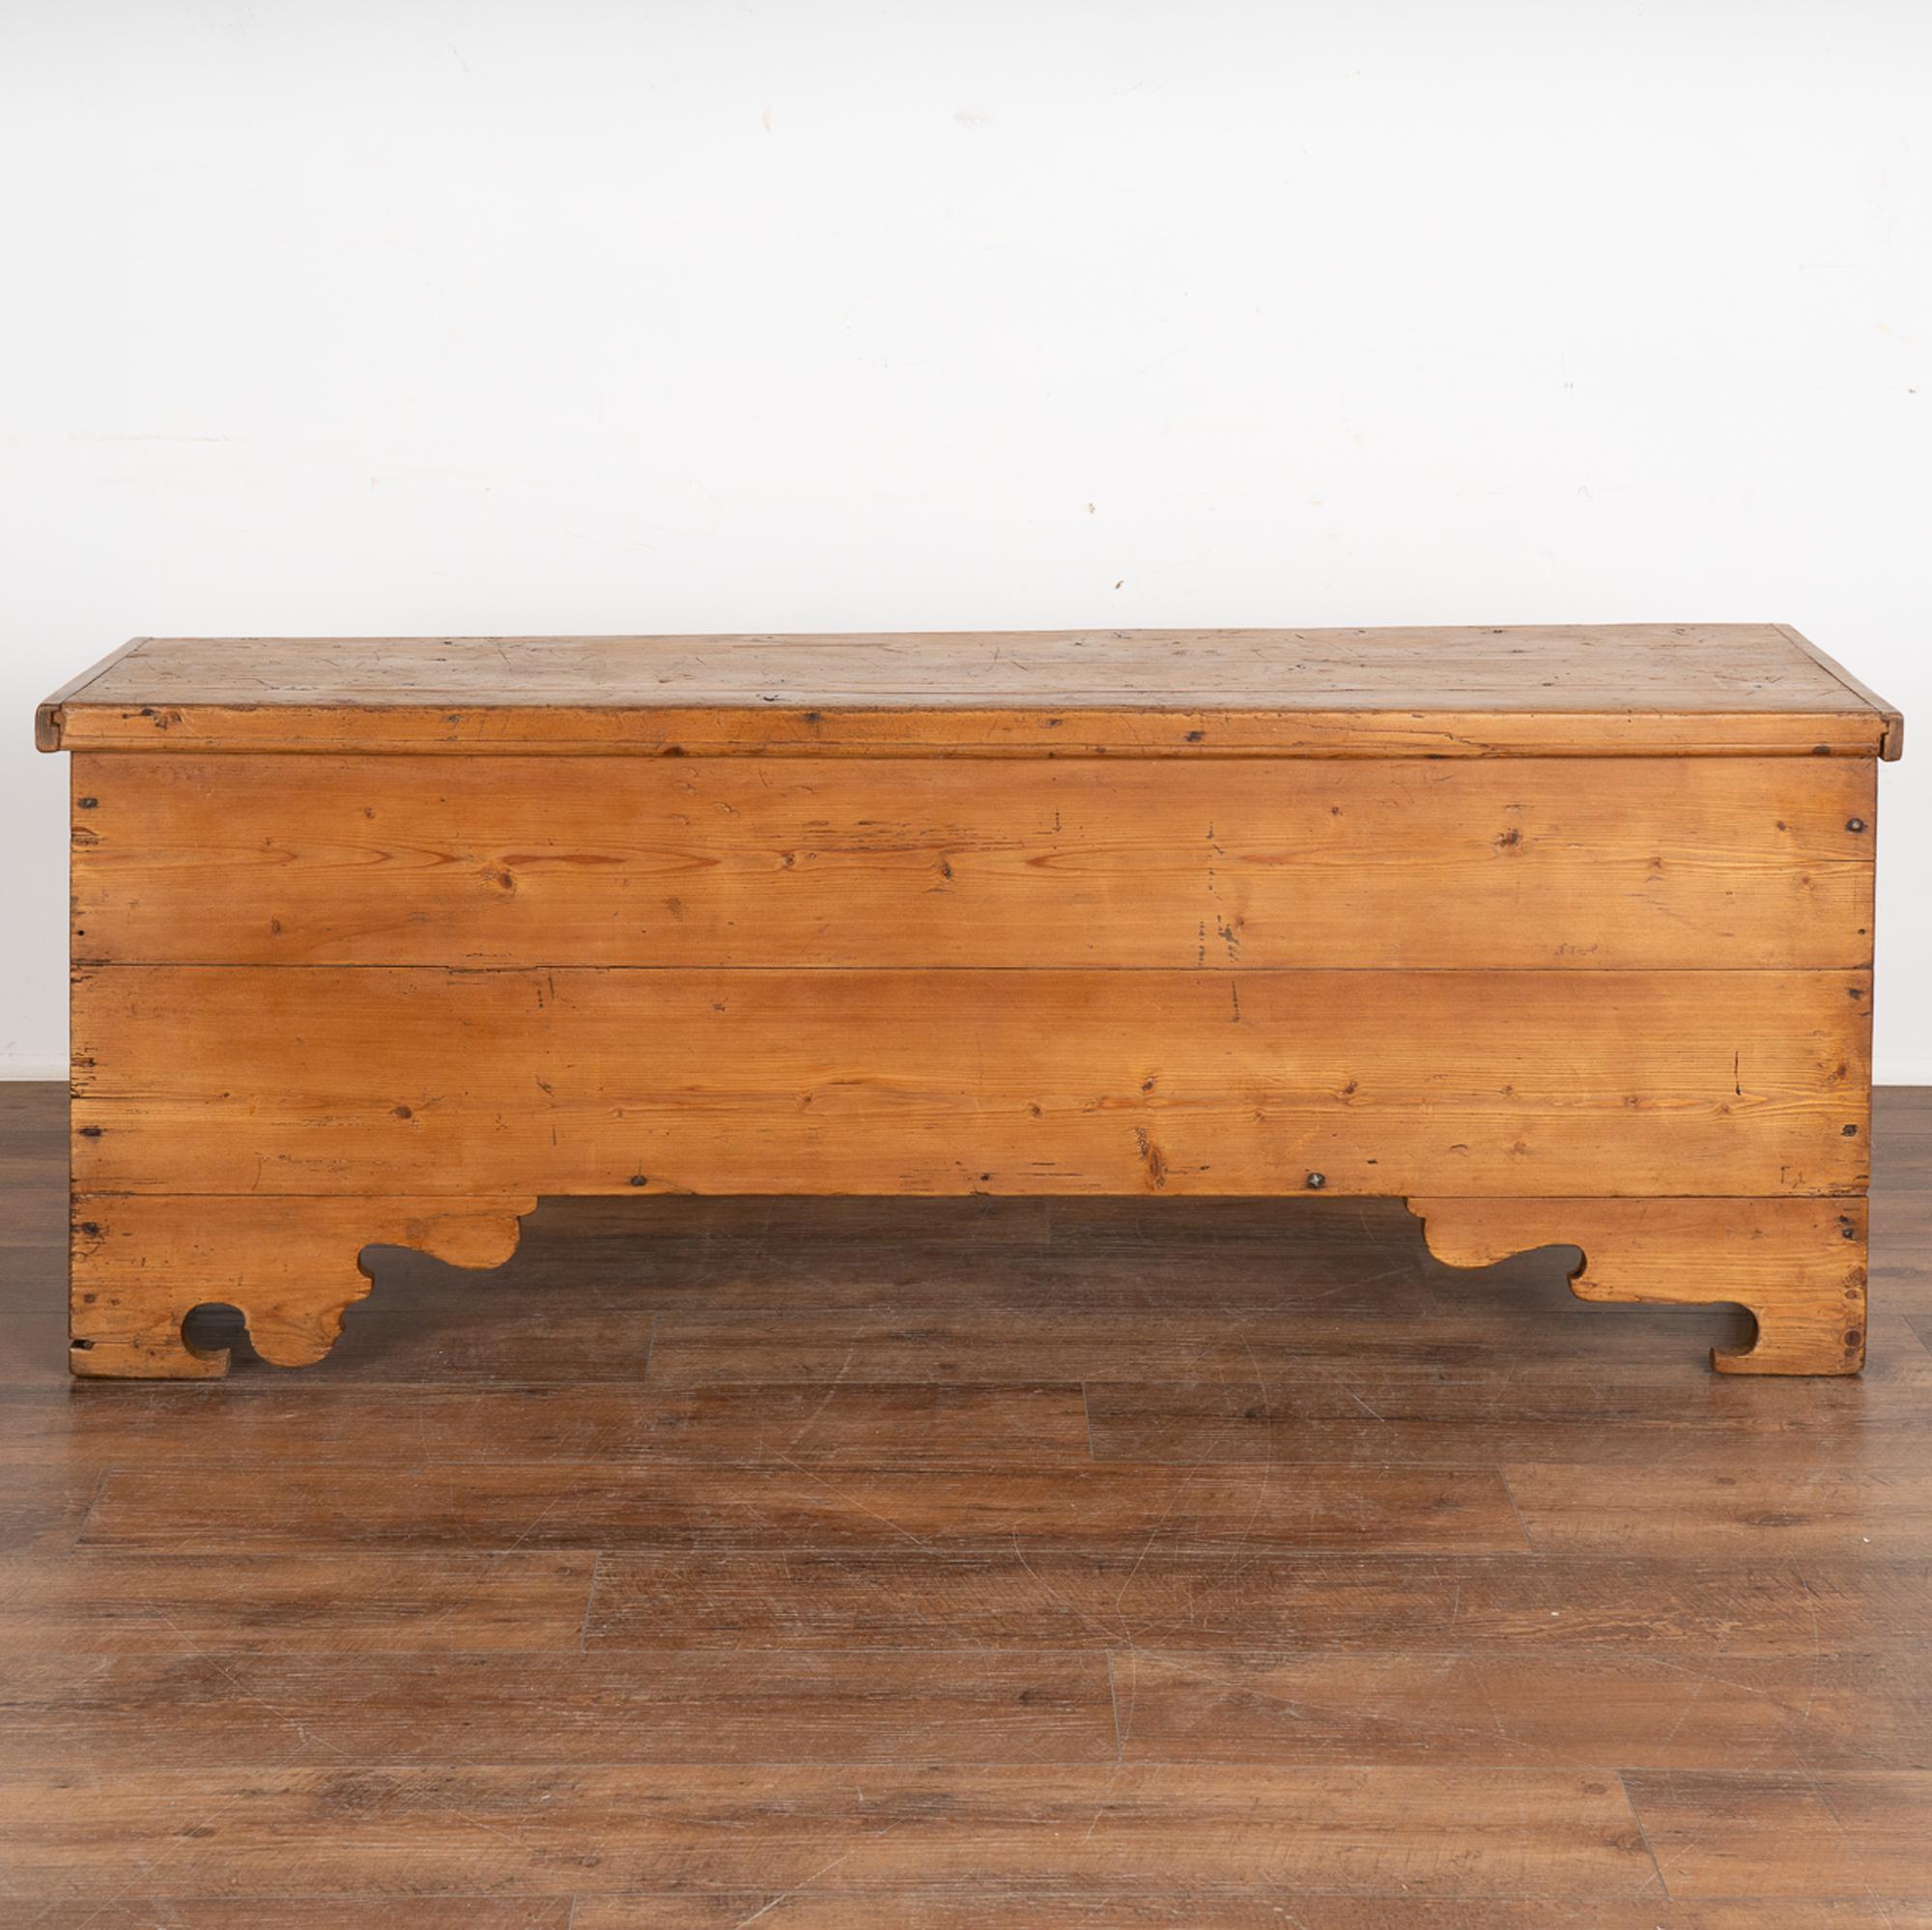 Country Narrow Pine Trunk or Bench with Storage, Sweden, circa 1840-1860